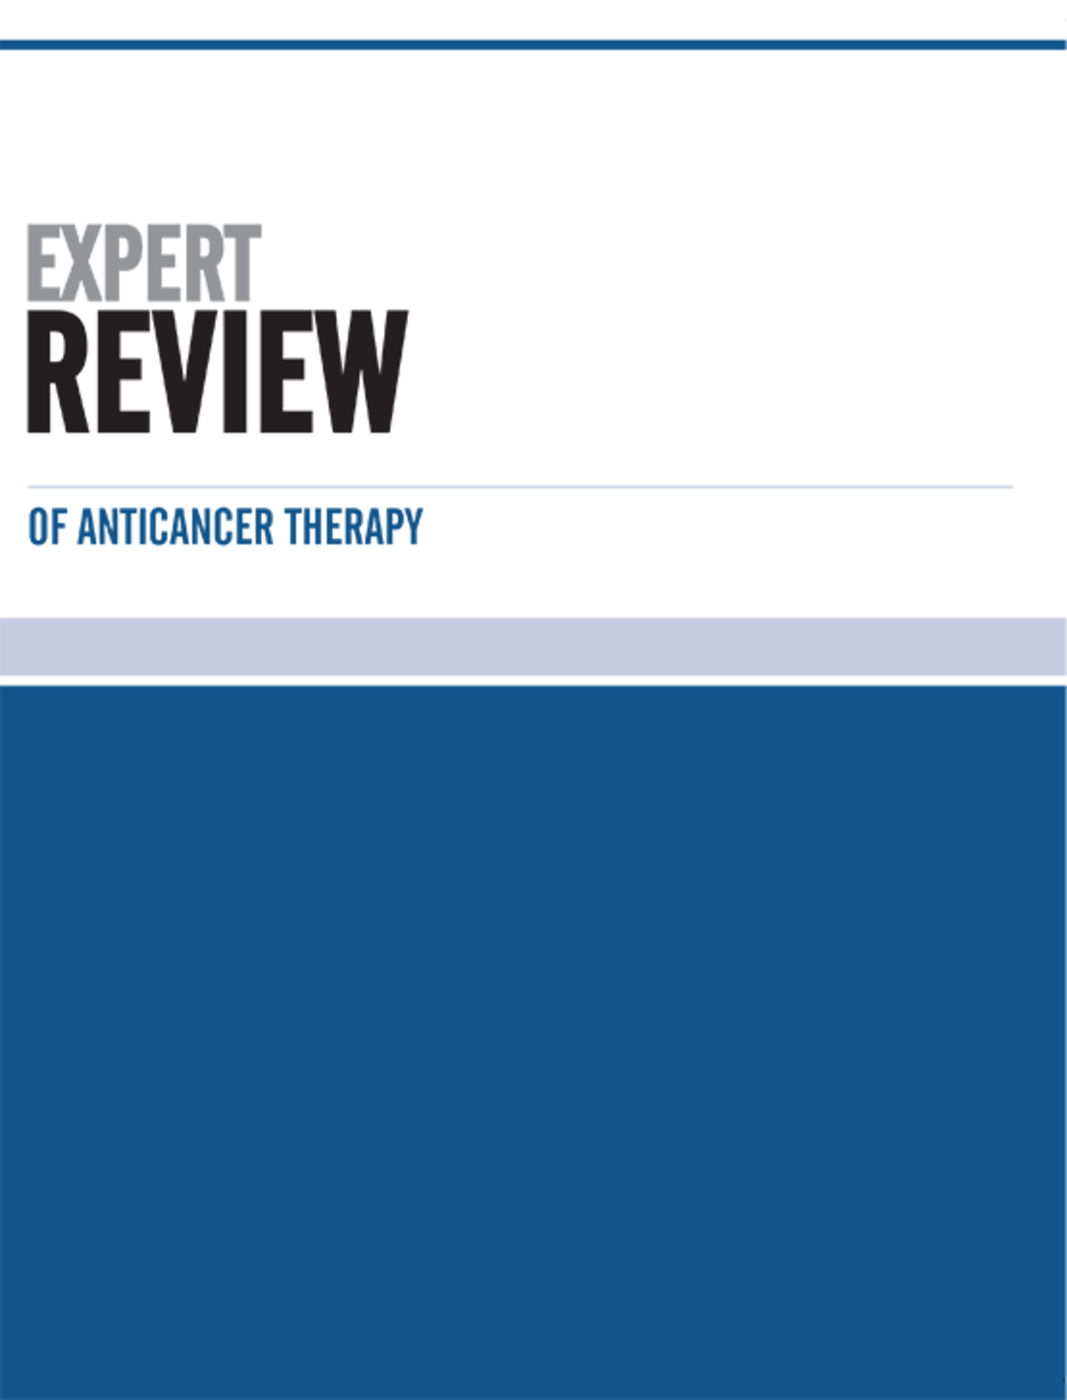 Expert Review of Anticancer Therapy journal